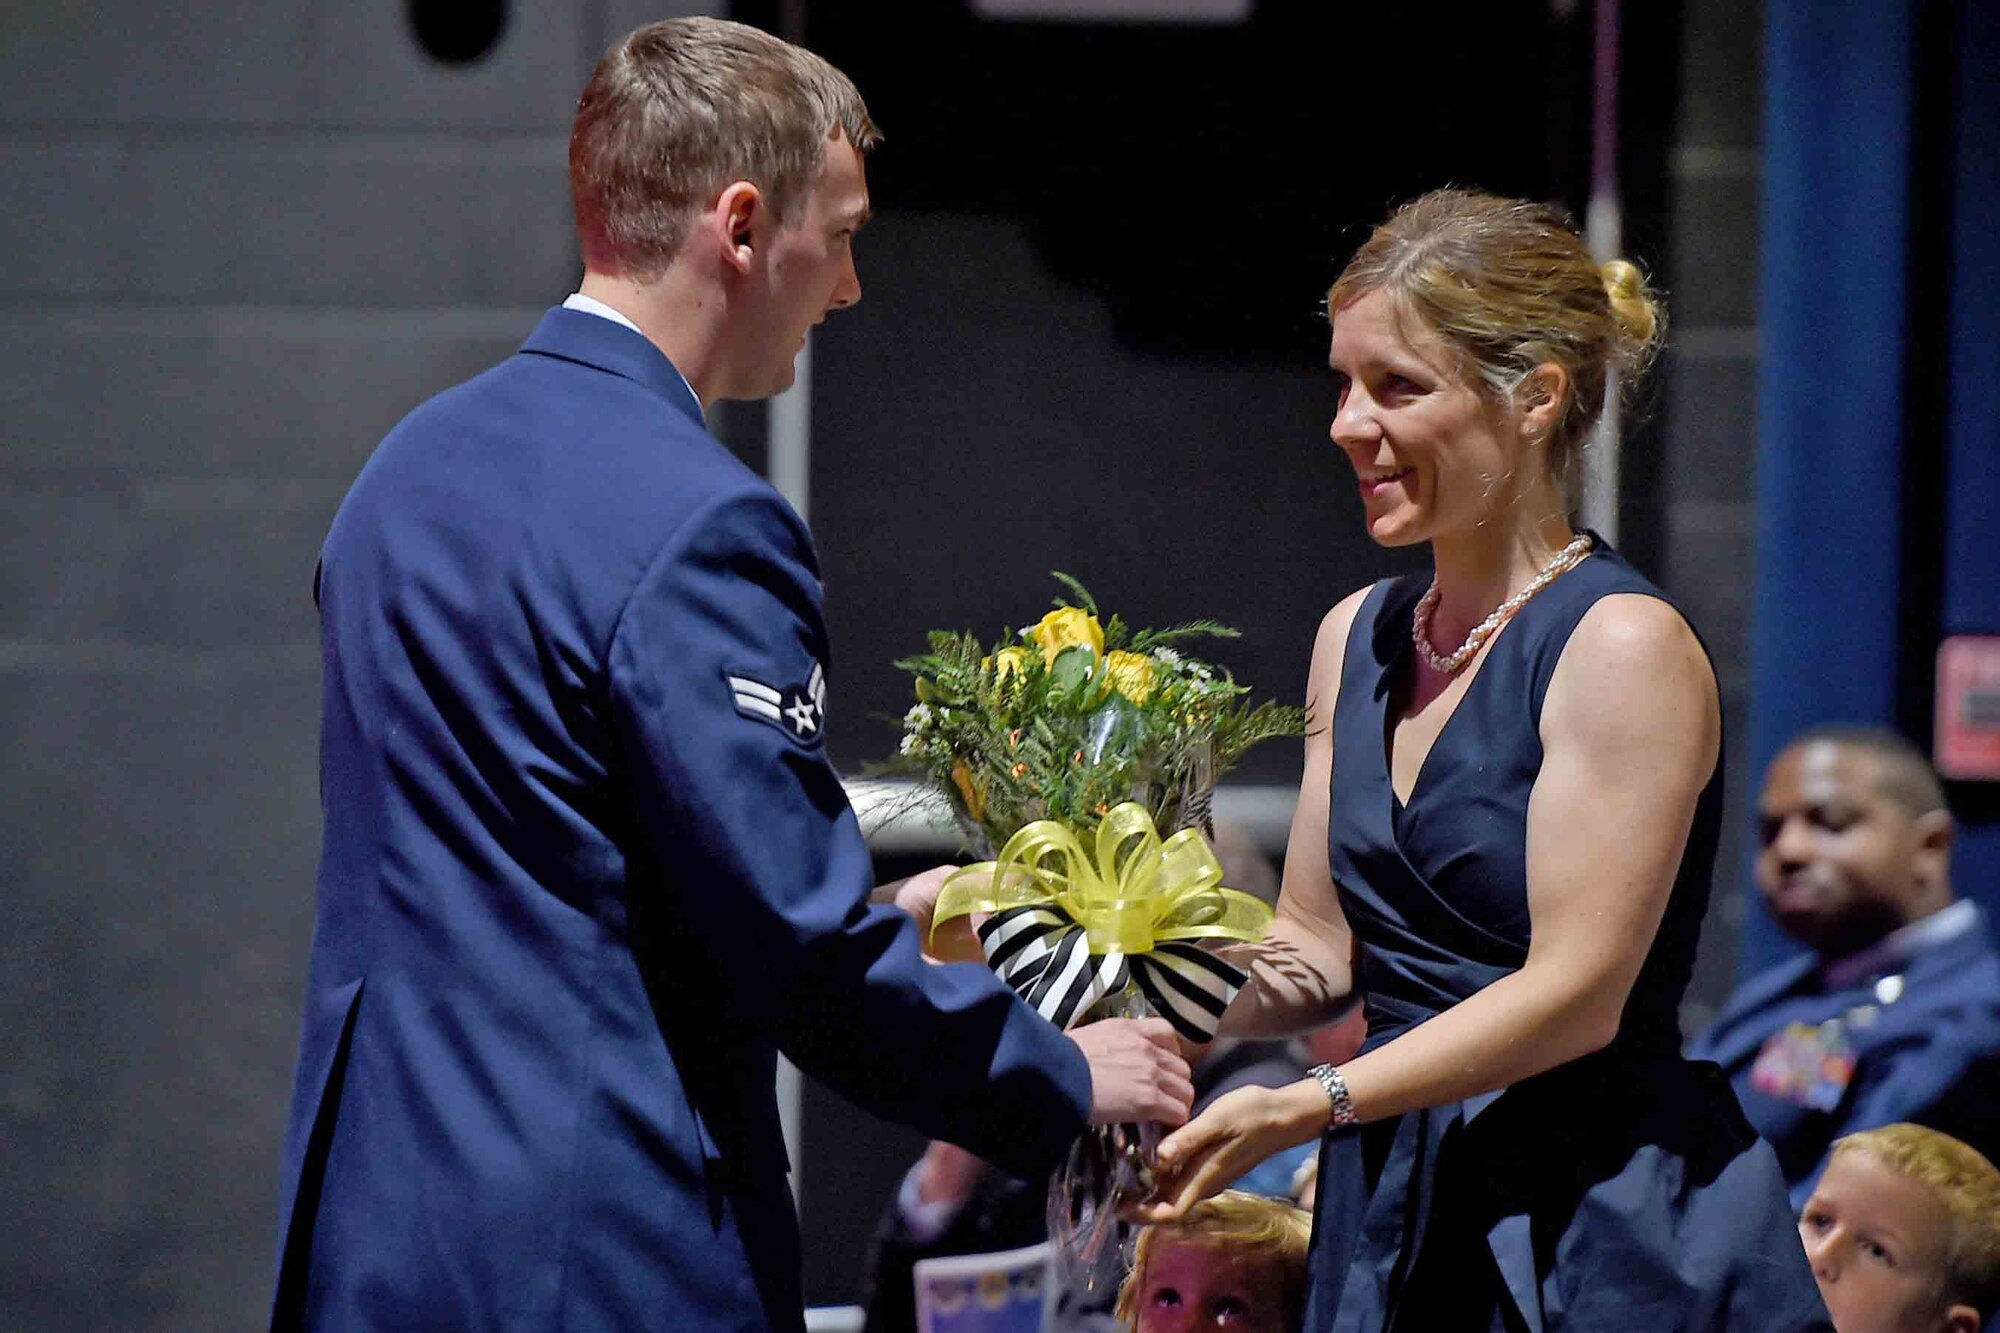 An Airman hands flowers to the new commnaders wife.